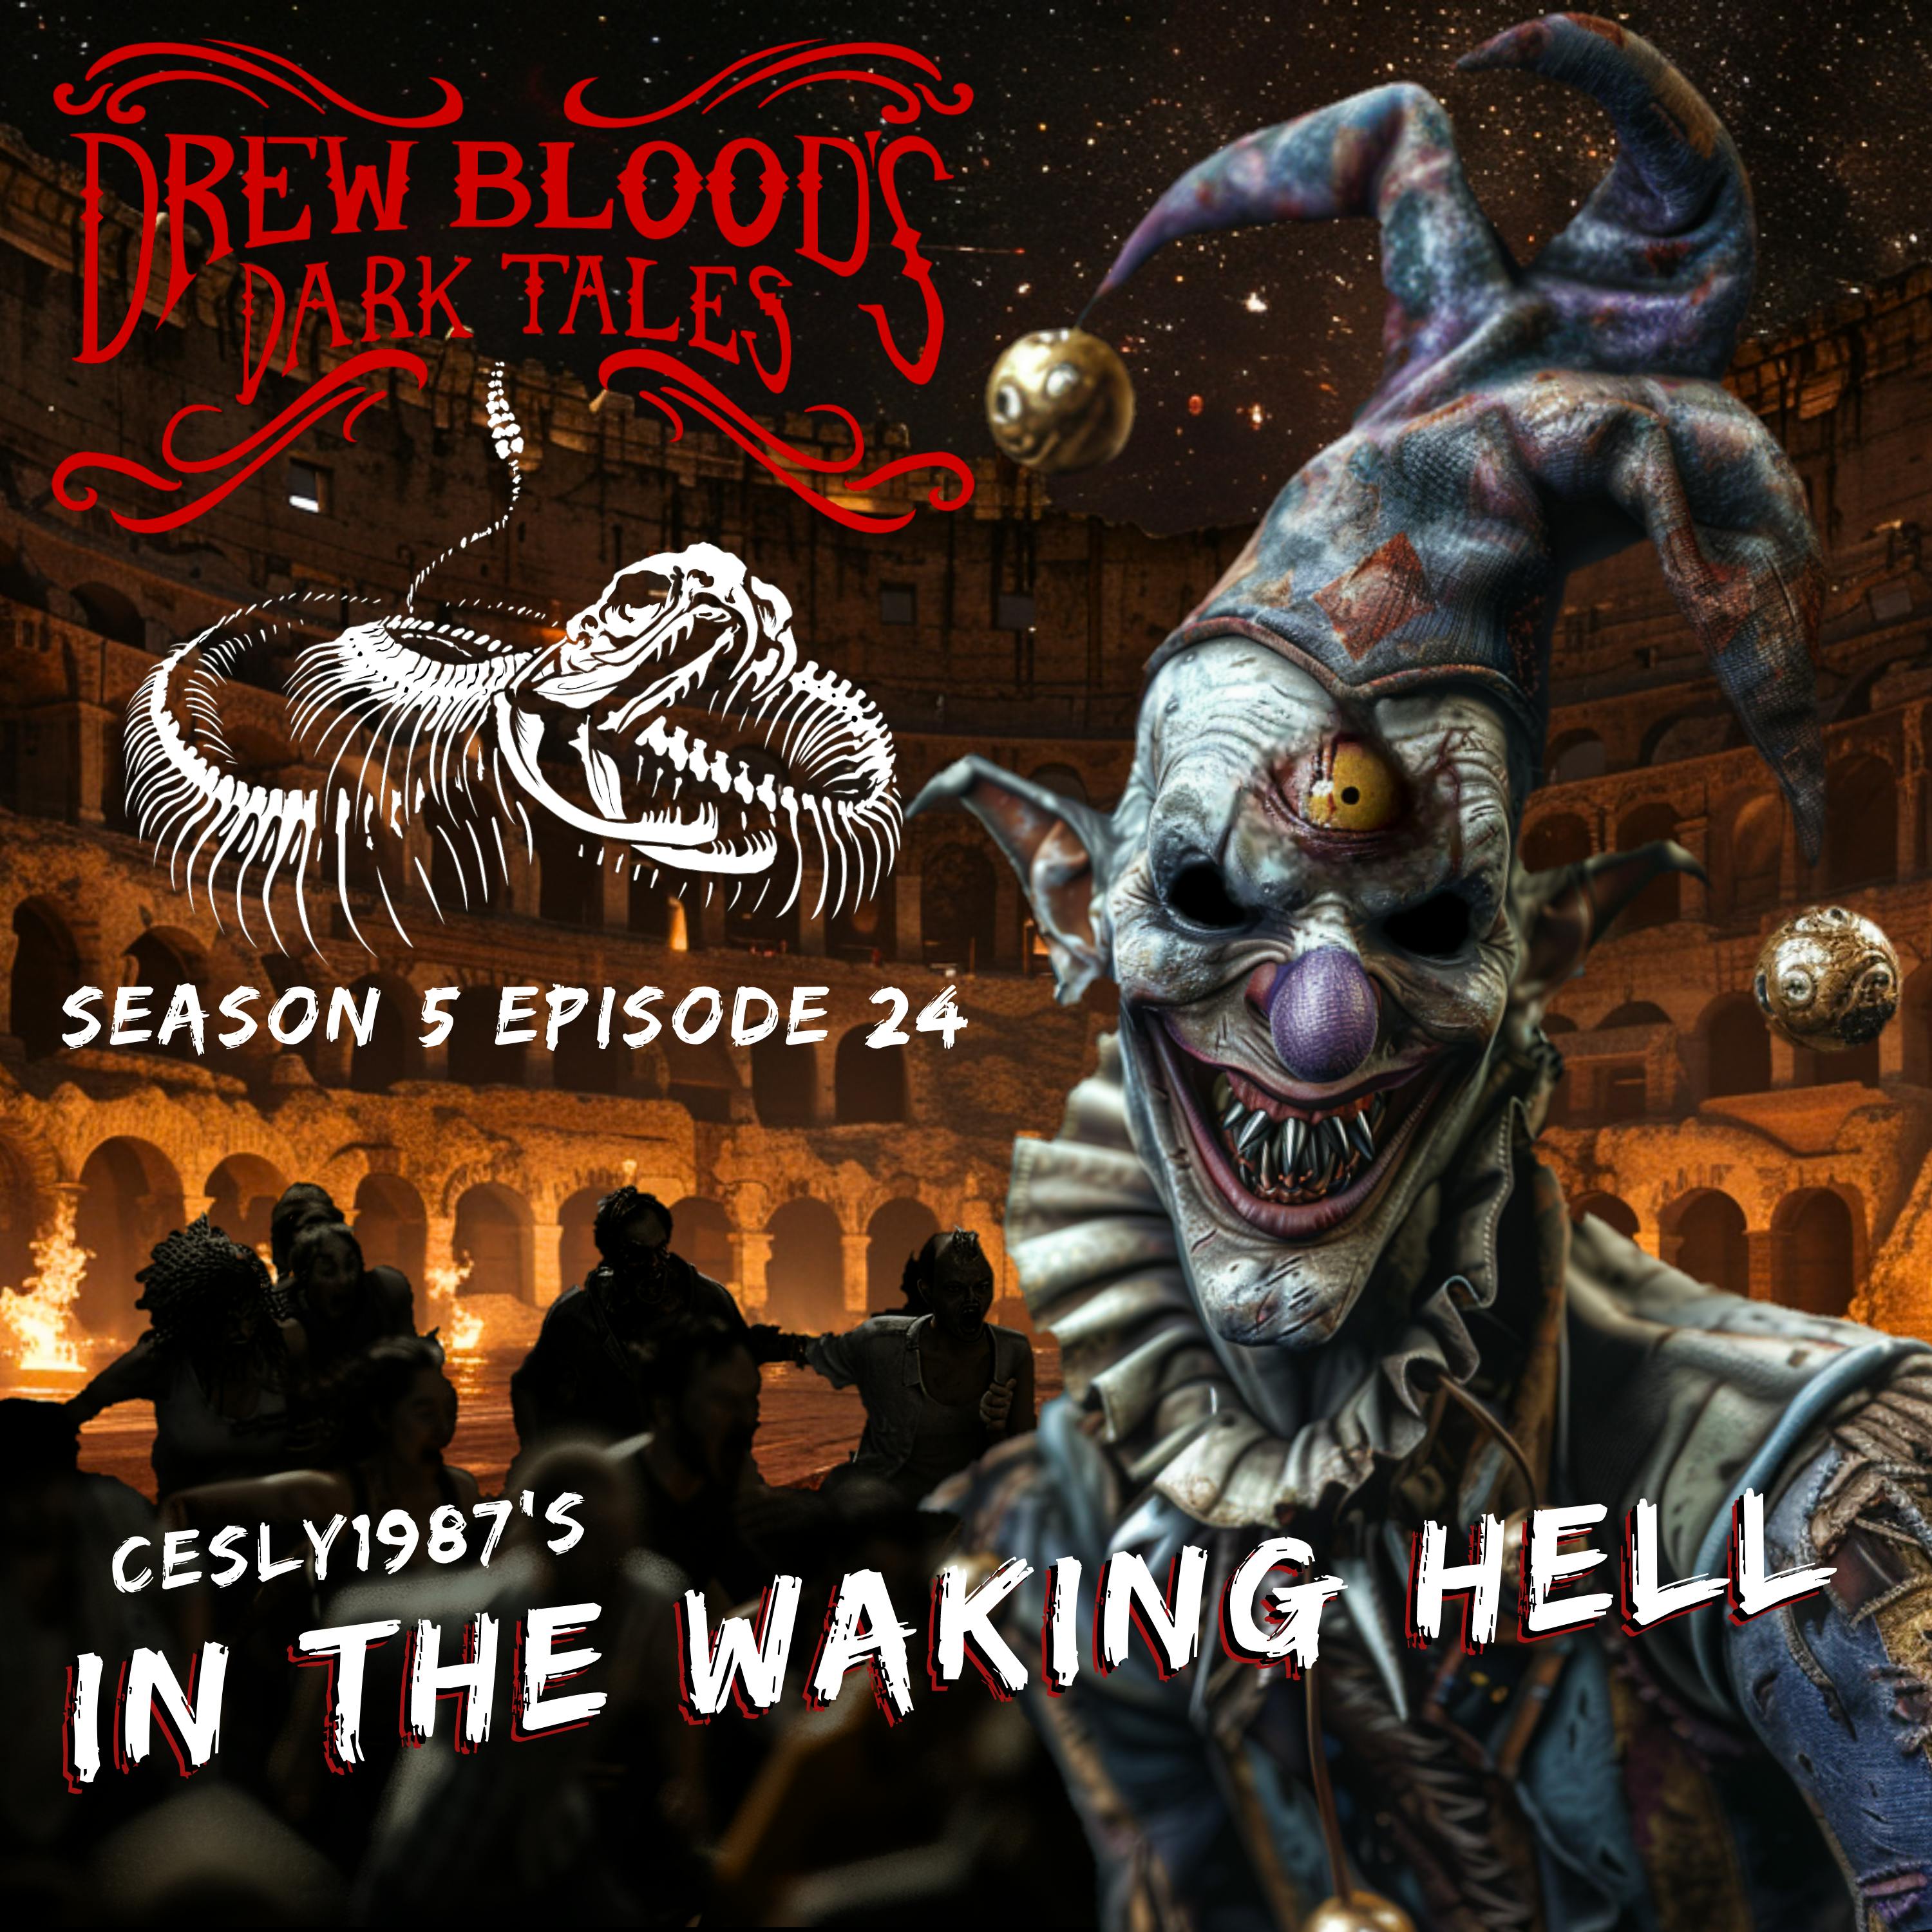 S5E24 - "In the Waking Hell" - Drew Blood